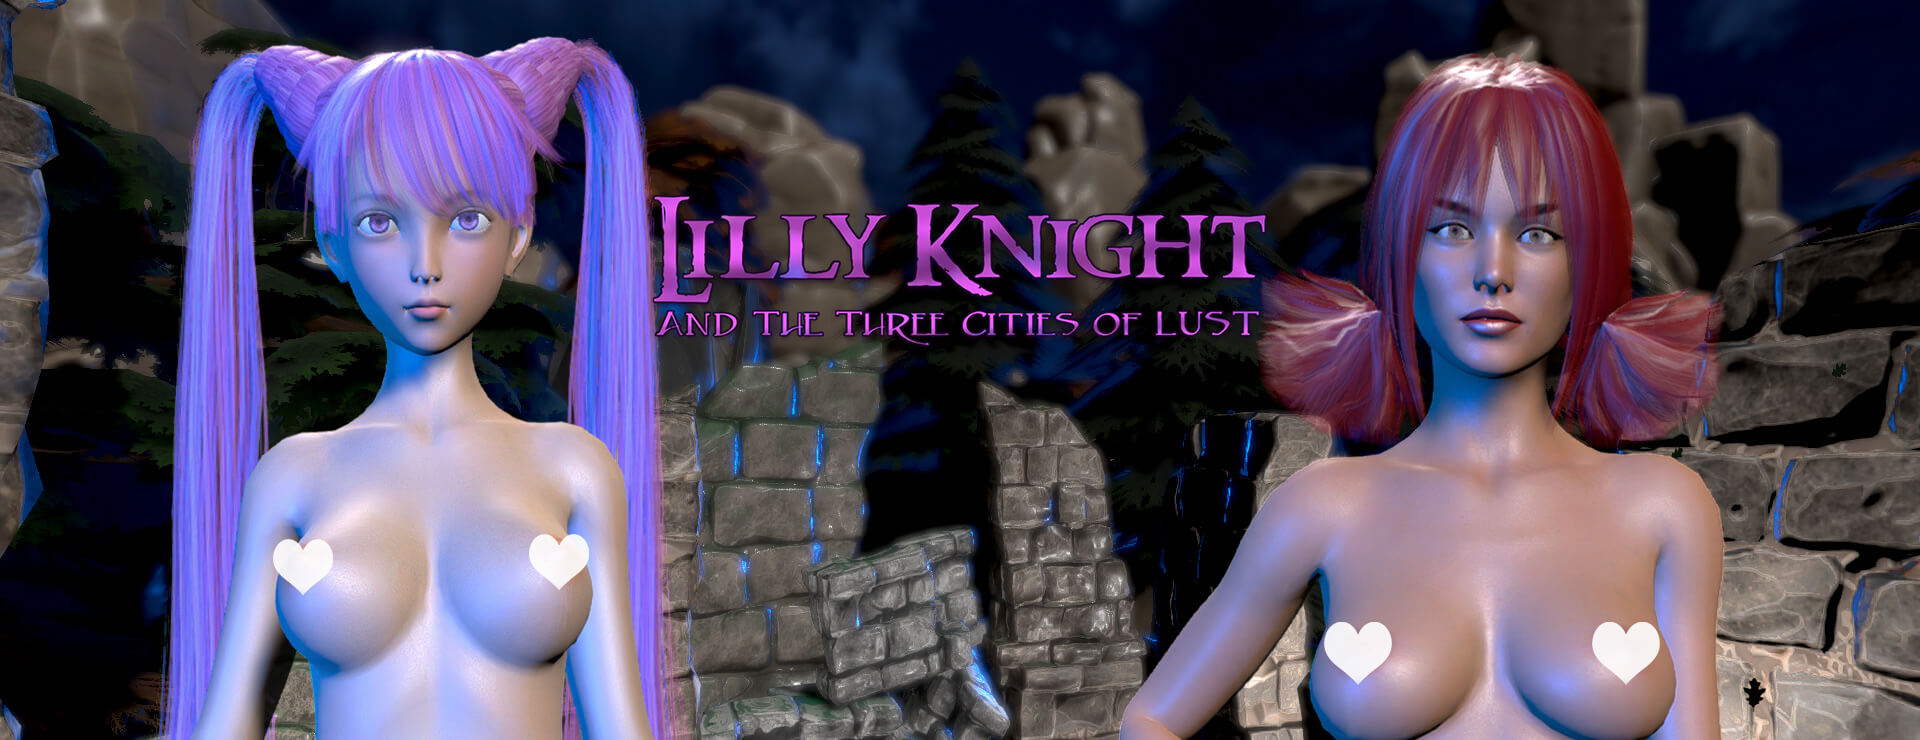 Lilly Knight and the Three Cities of Lust - アクションアドベンチャー ゲーム